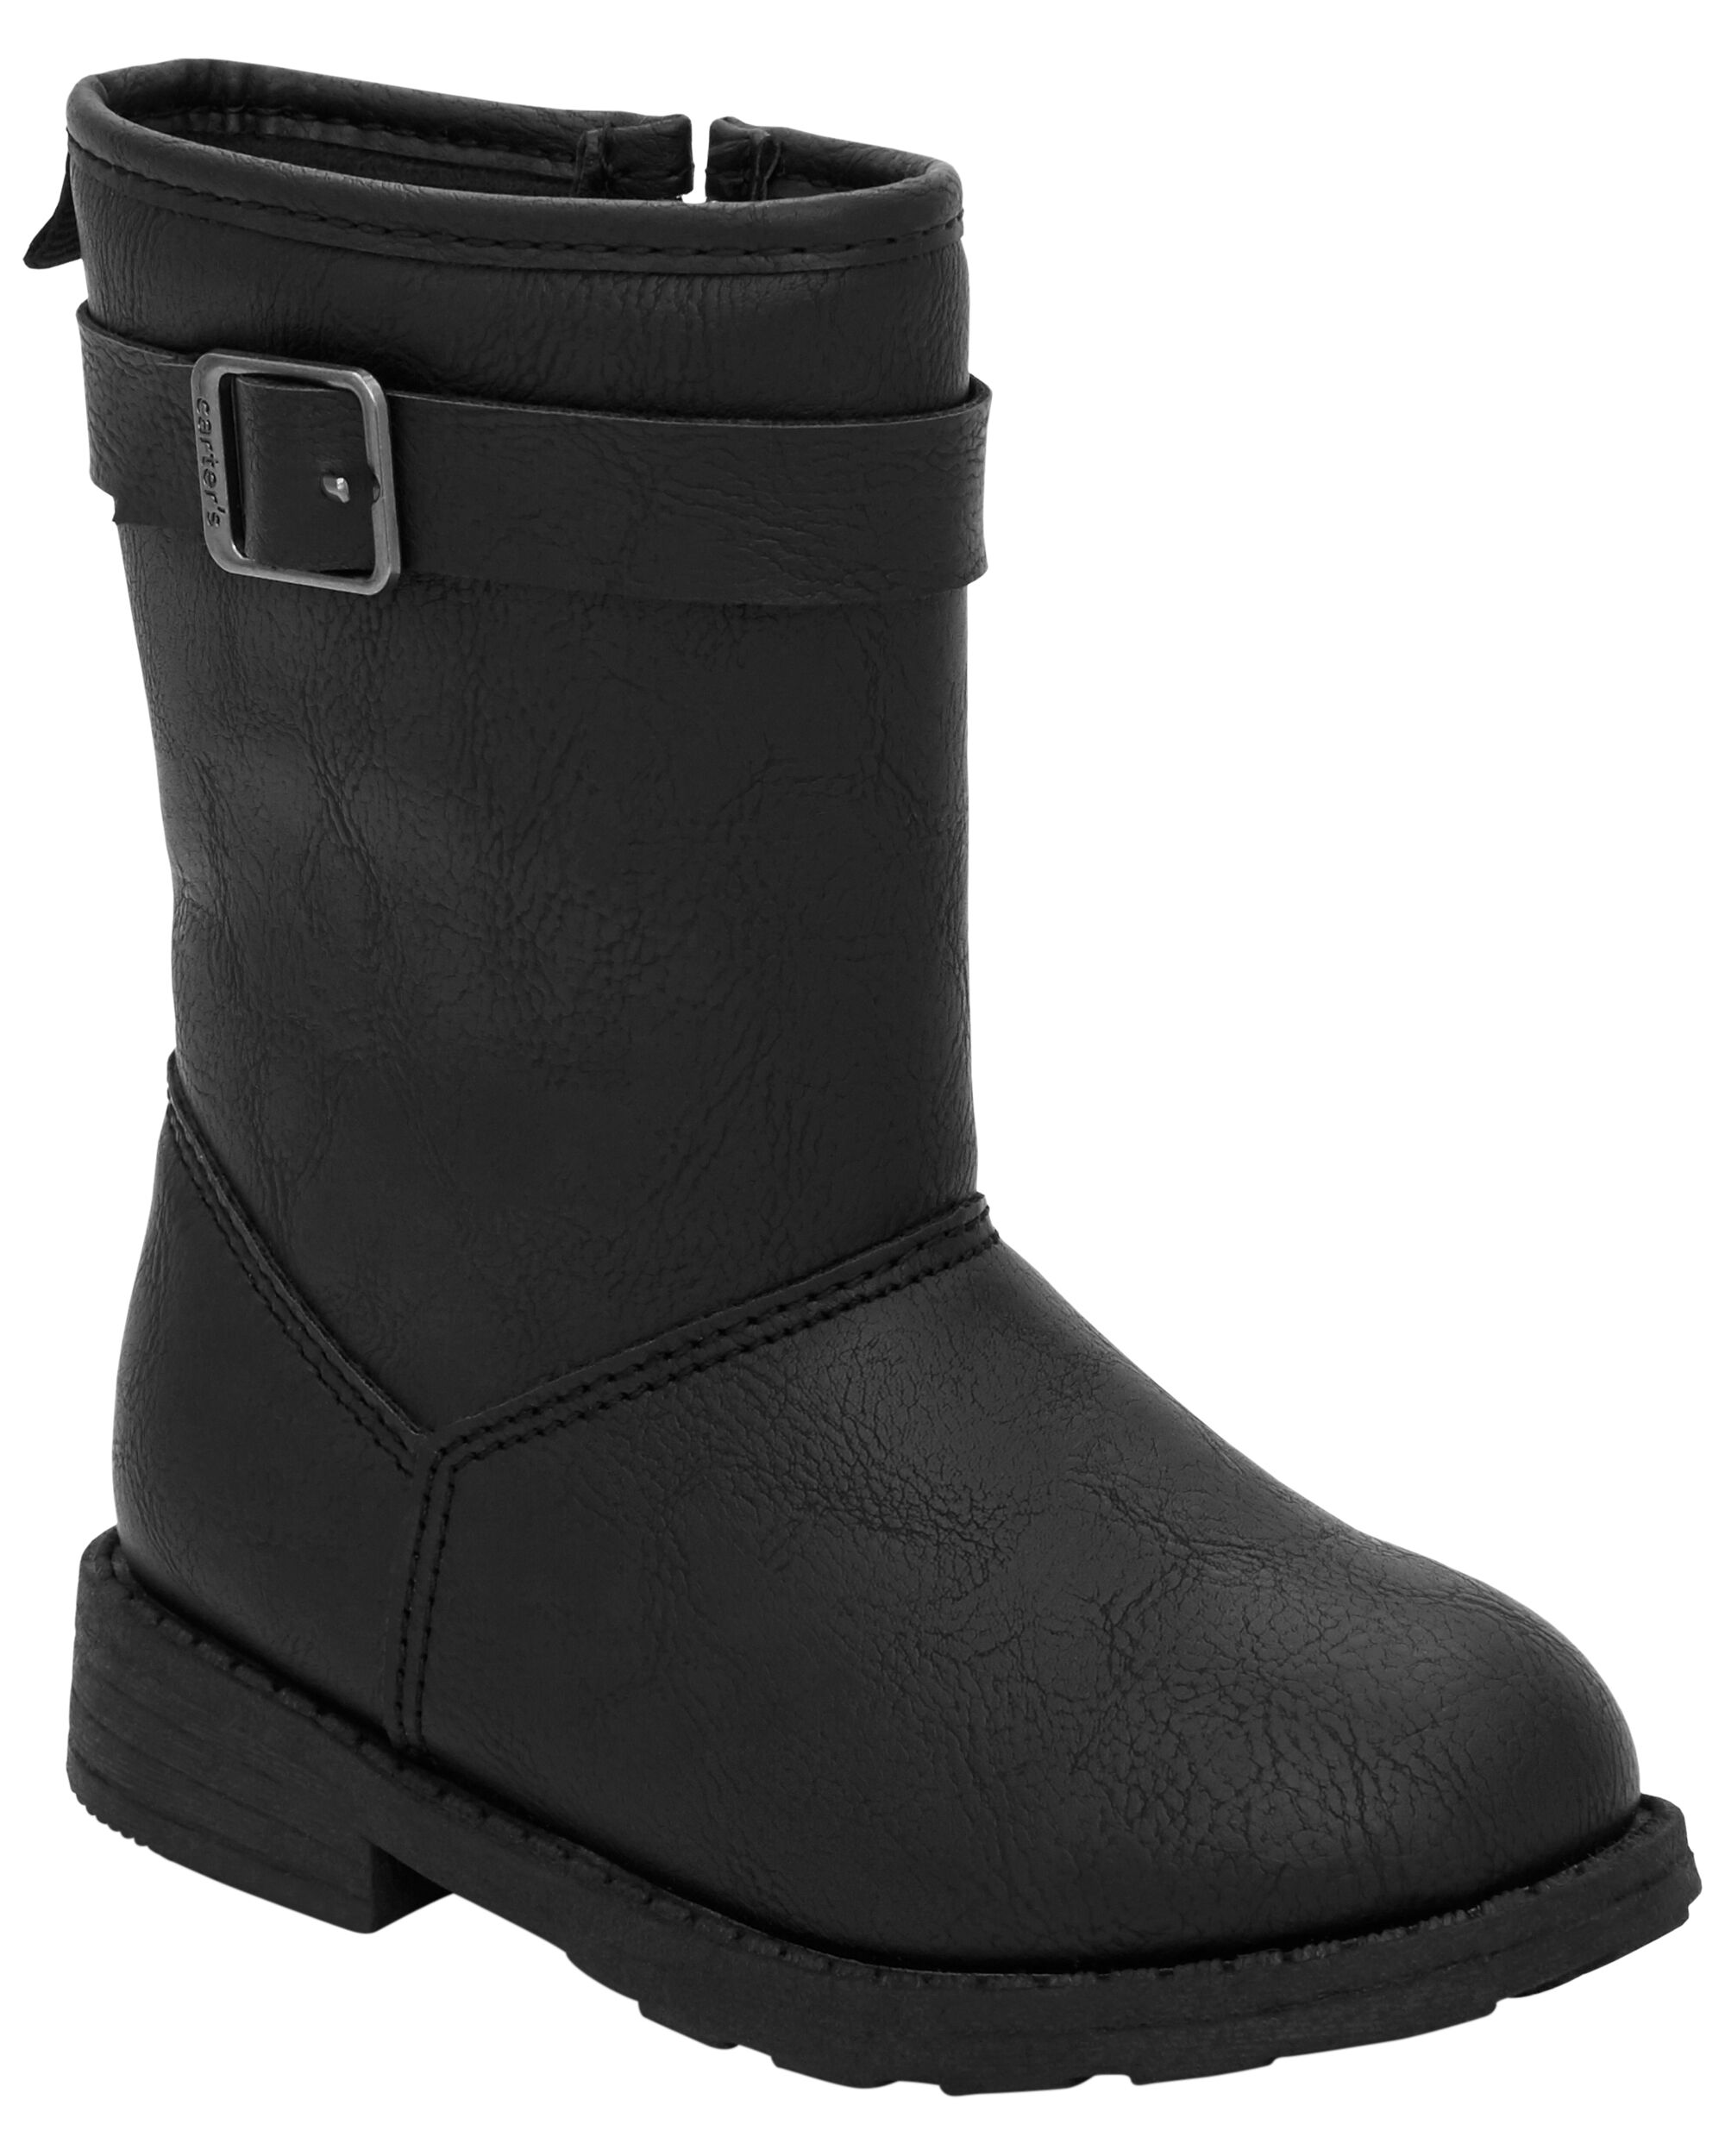 Toddler Carters Riding Boots